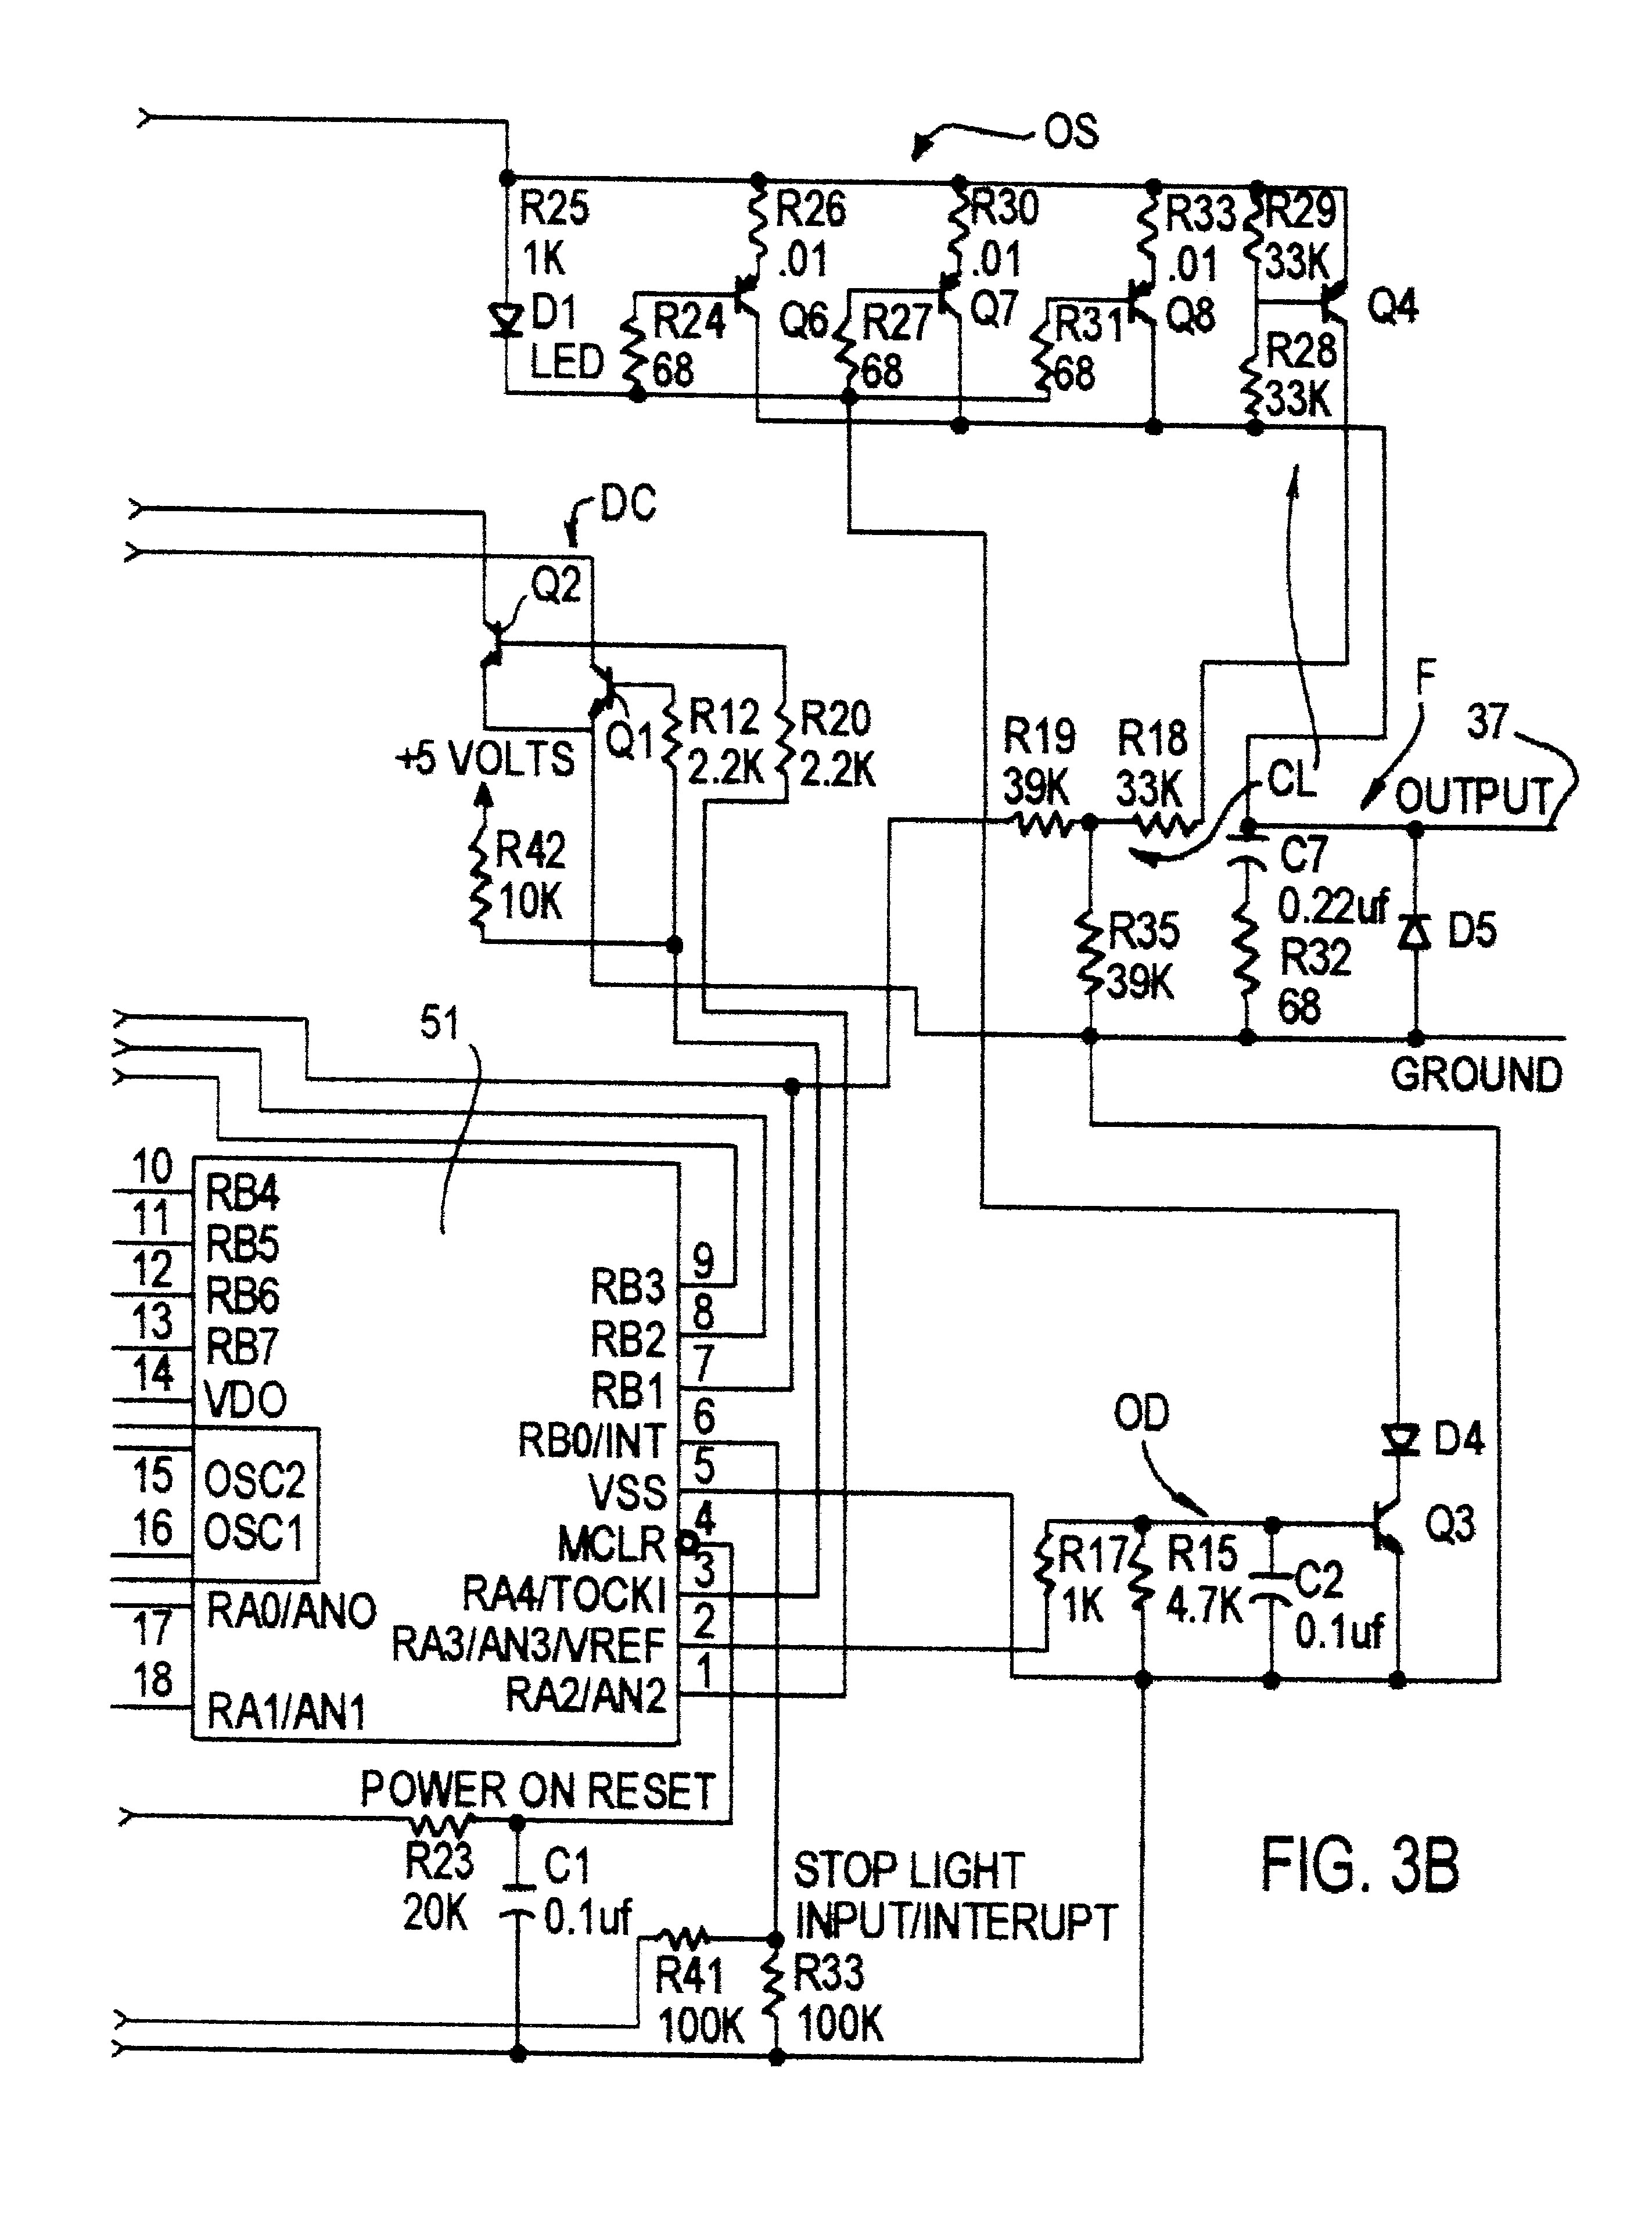 Brake Switch Wiring Diagram Electric Trailer Brake Parts Diagram How Install A Controller On tow Of Brake Switch Wiring Diagram